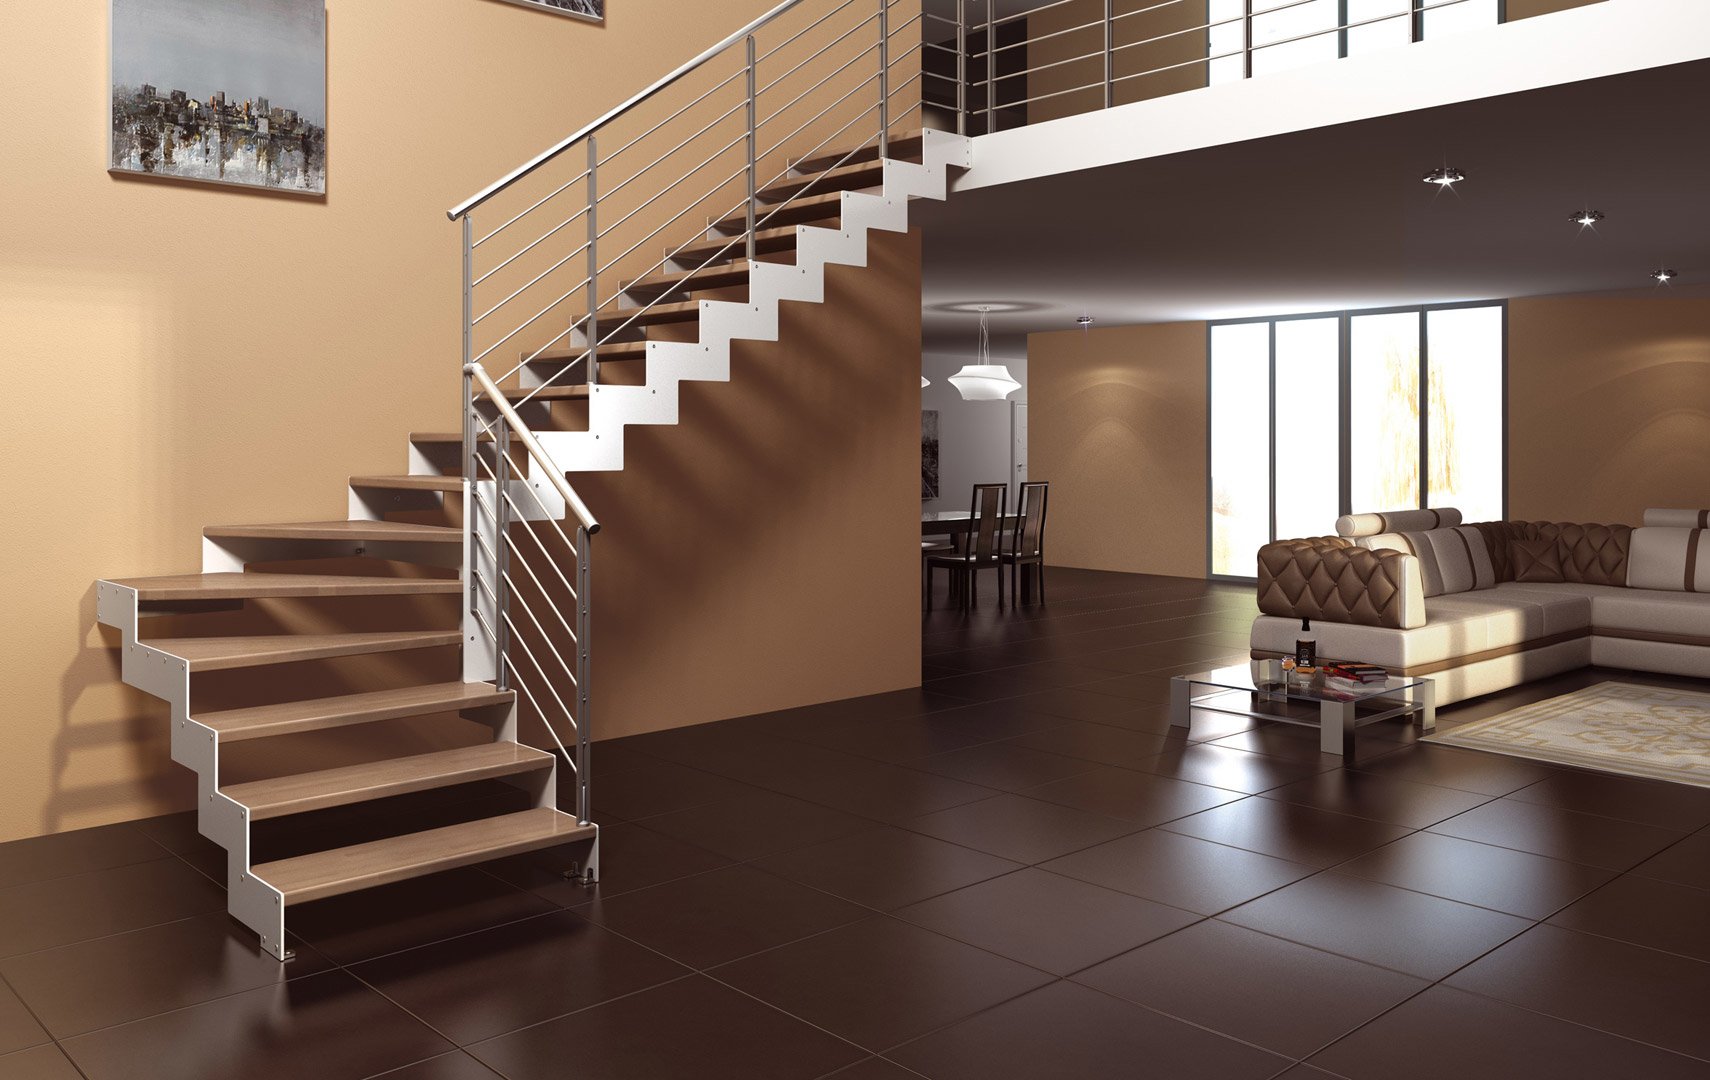 do you want to furnish the spaces living and stay whether to choose open staircases